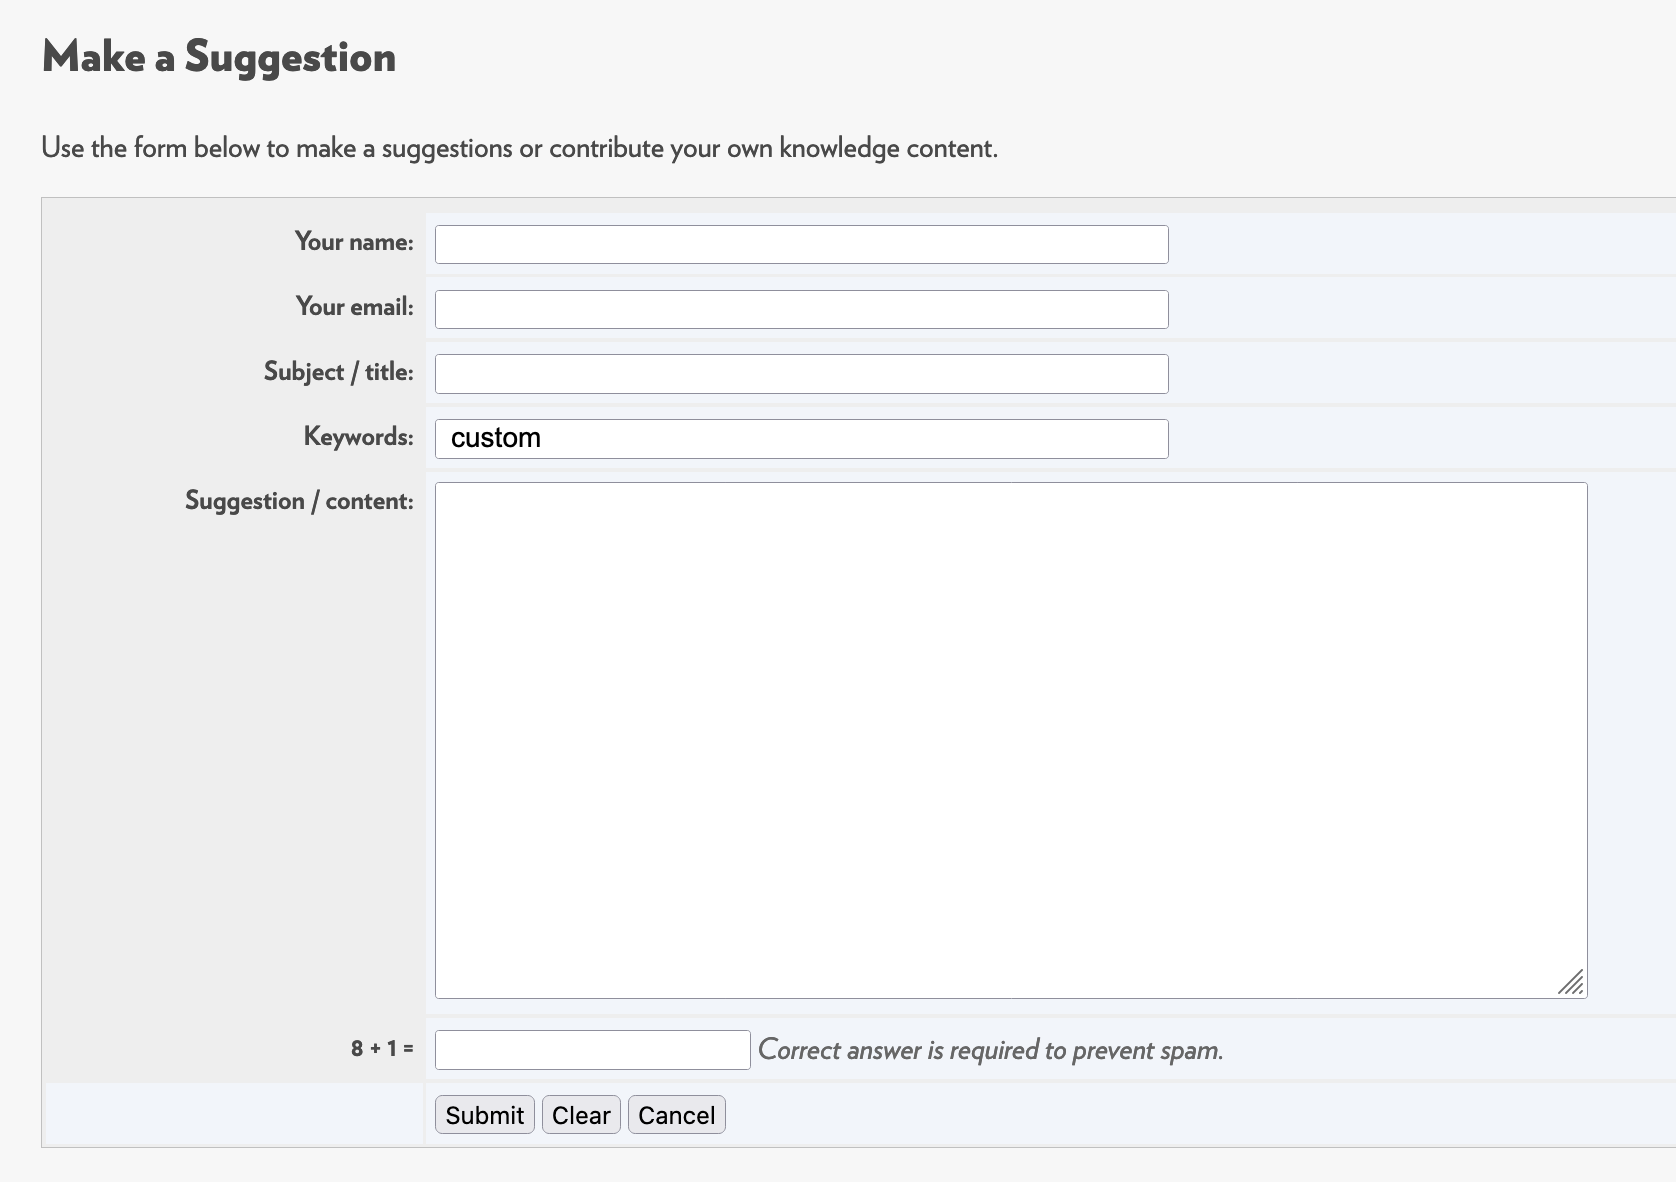 Make a suggestion form with a pre-populated keyword